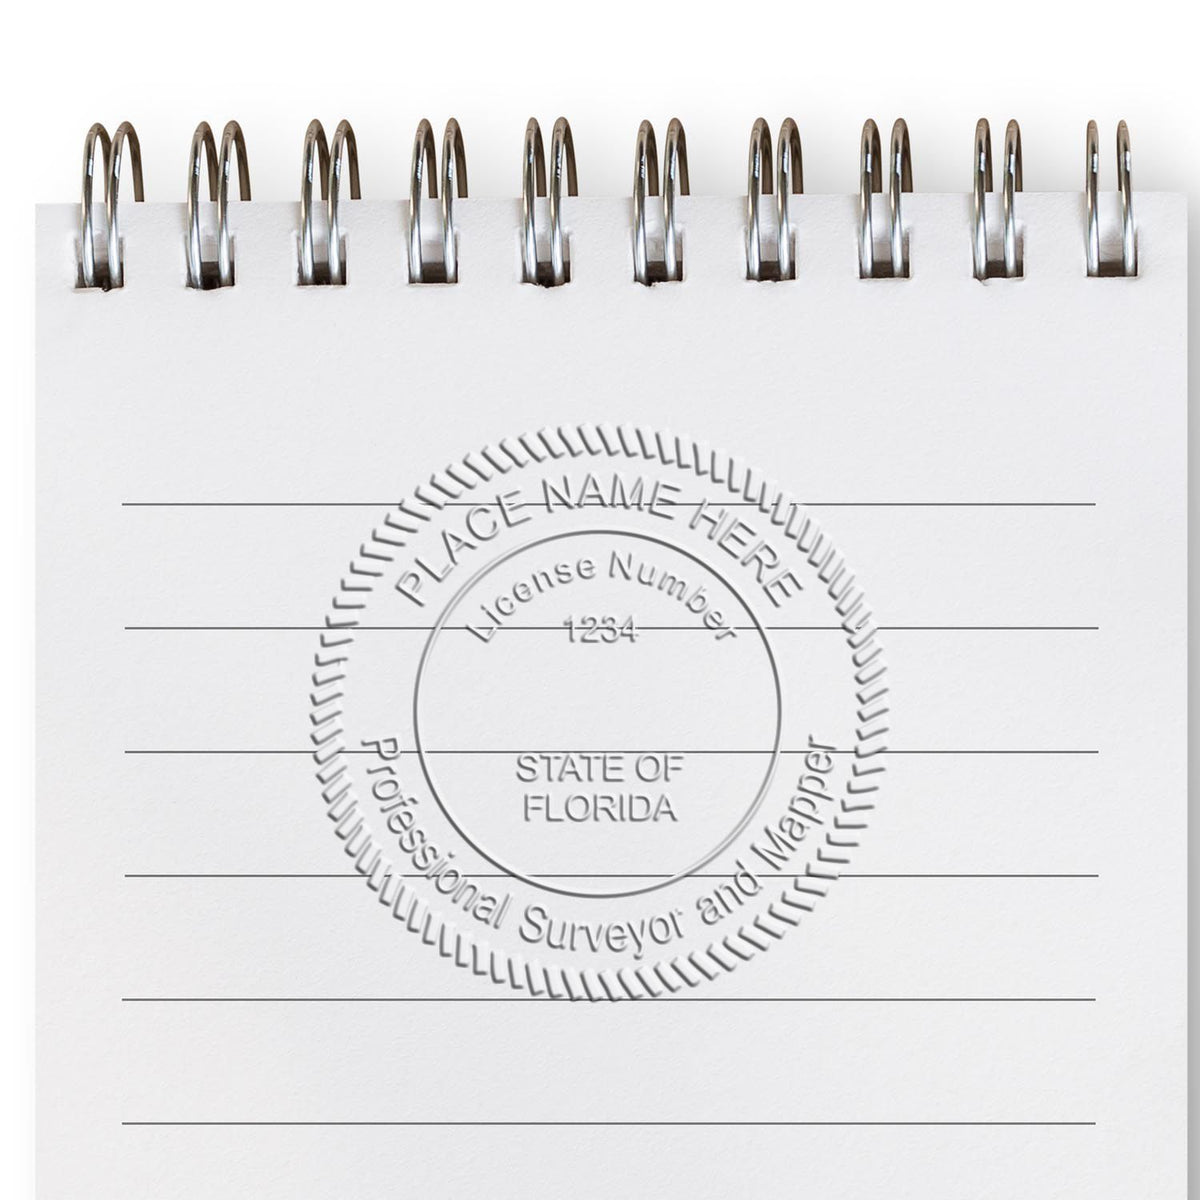 An alternative view of the Handheld Florida Land Surveyor Seal stamped on a sheet of paper showing the image in use